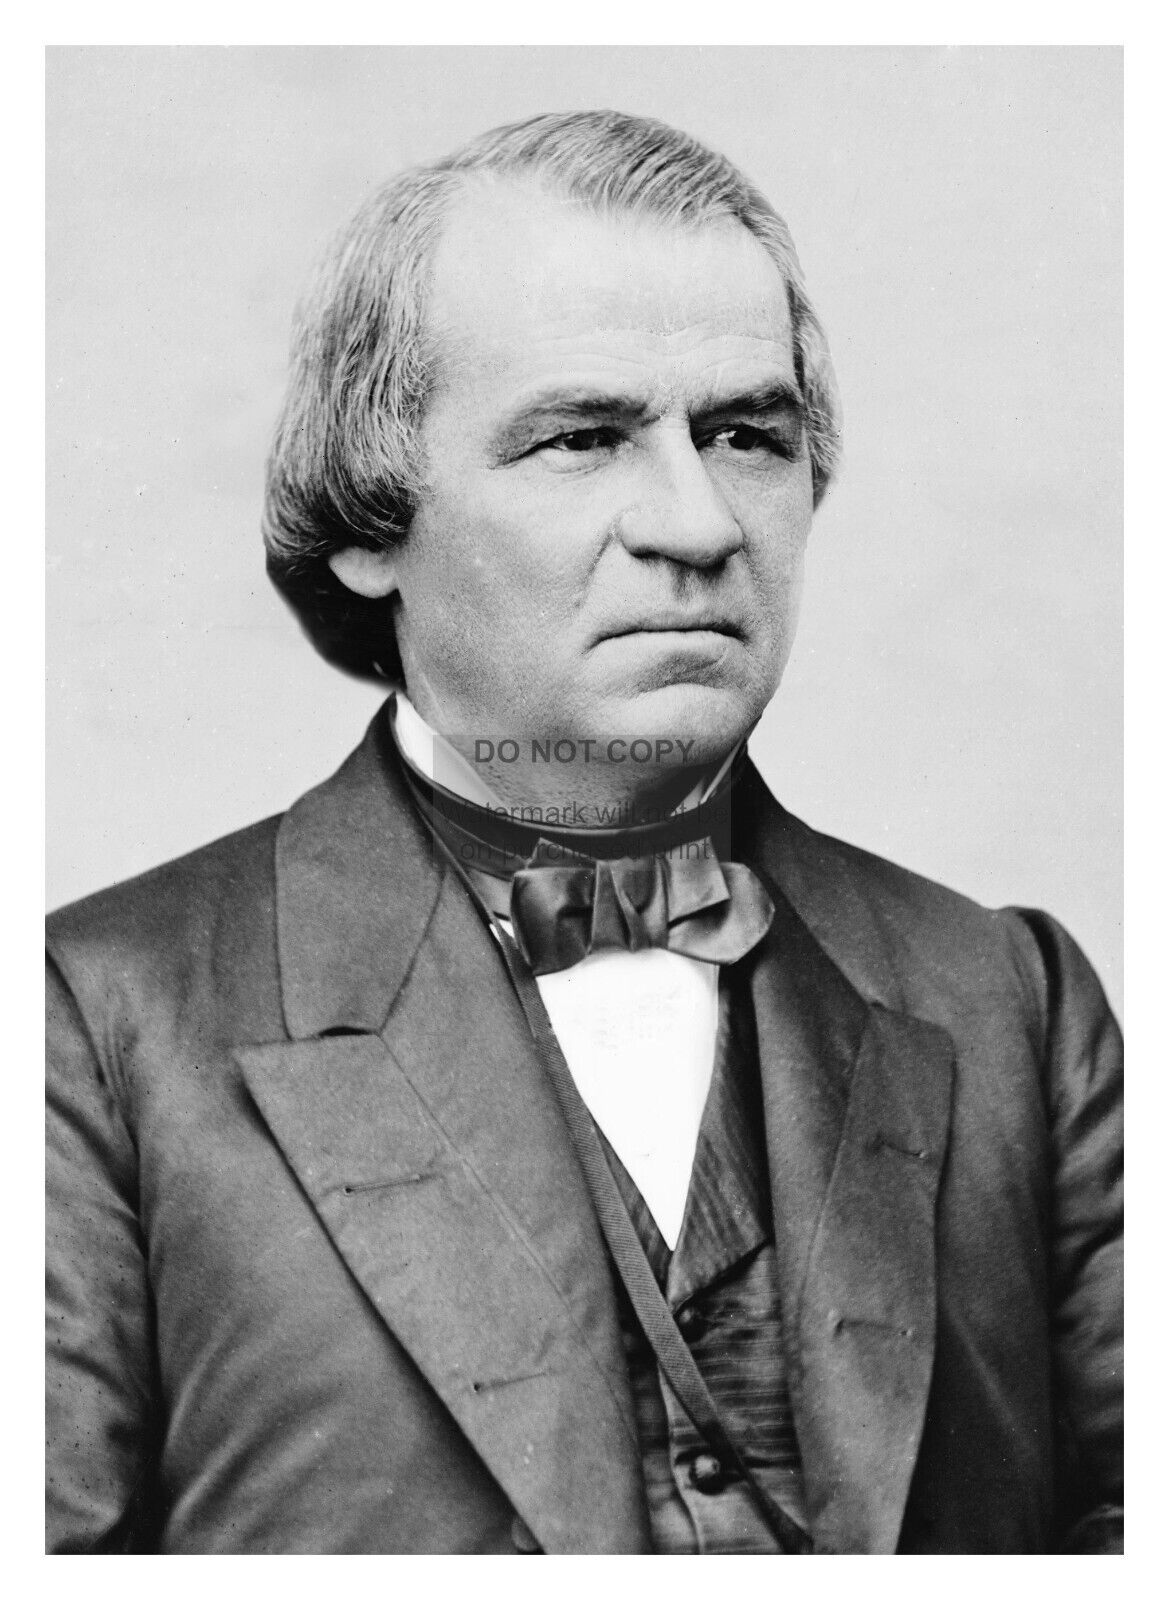 ANDREW JOHNSON 17TH PRESIDENT OF THE UNITED STATES OF AMERICA 5X7 PHOTO REPRINT